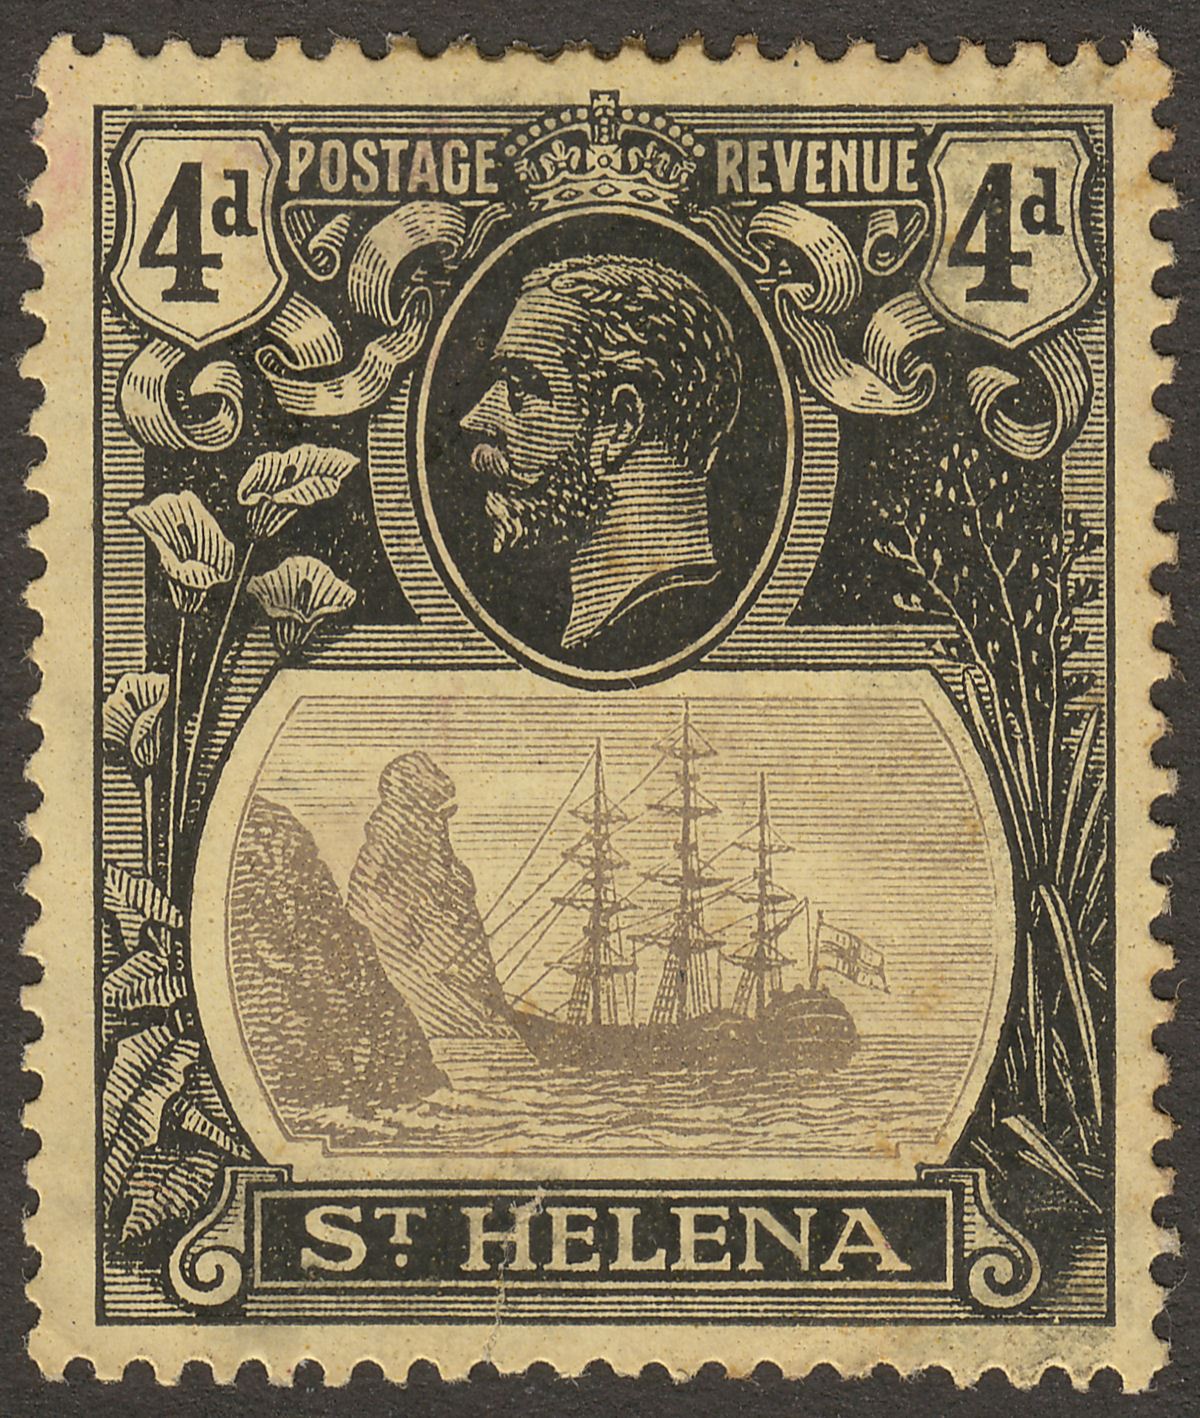 St Helena 1923 KGV 4d Grey + Blk on Yellow w Cleft Rock Mint SG92c c£250 Faults